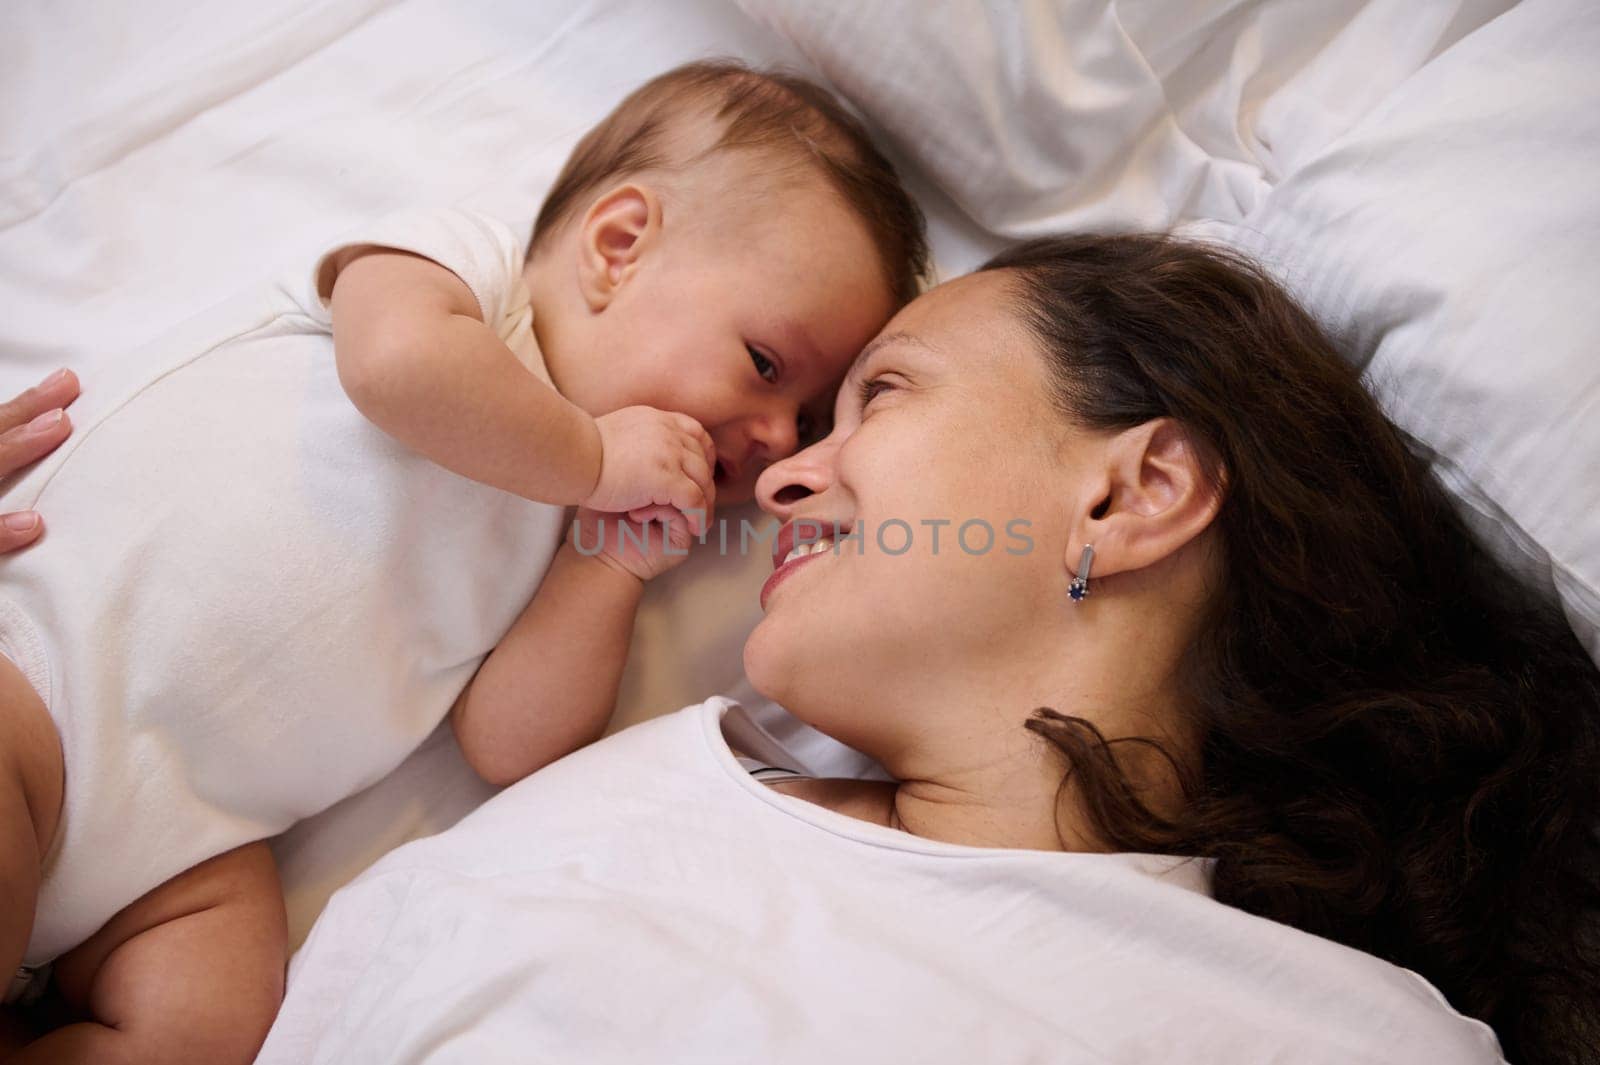 Close-up portrait of a happy smiling mother with her cute little baby lying on the bed, feeling emotional contact by artgf